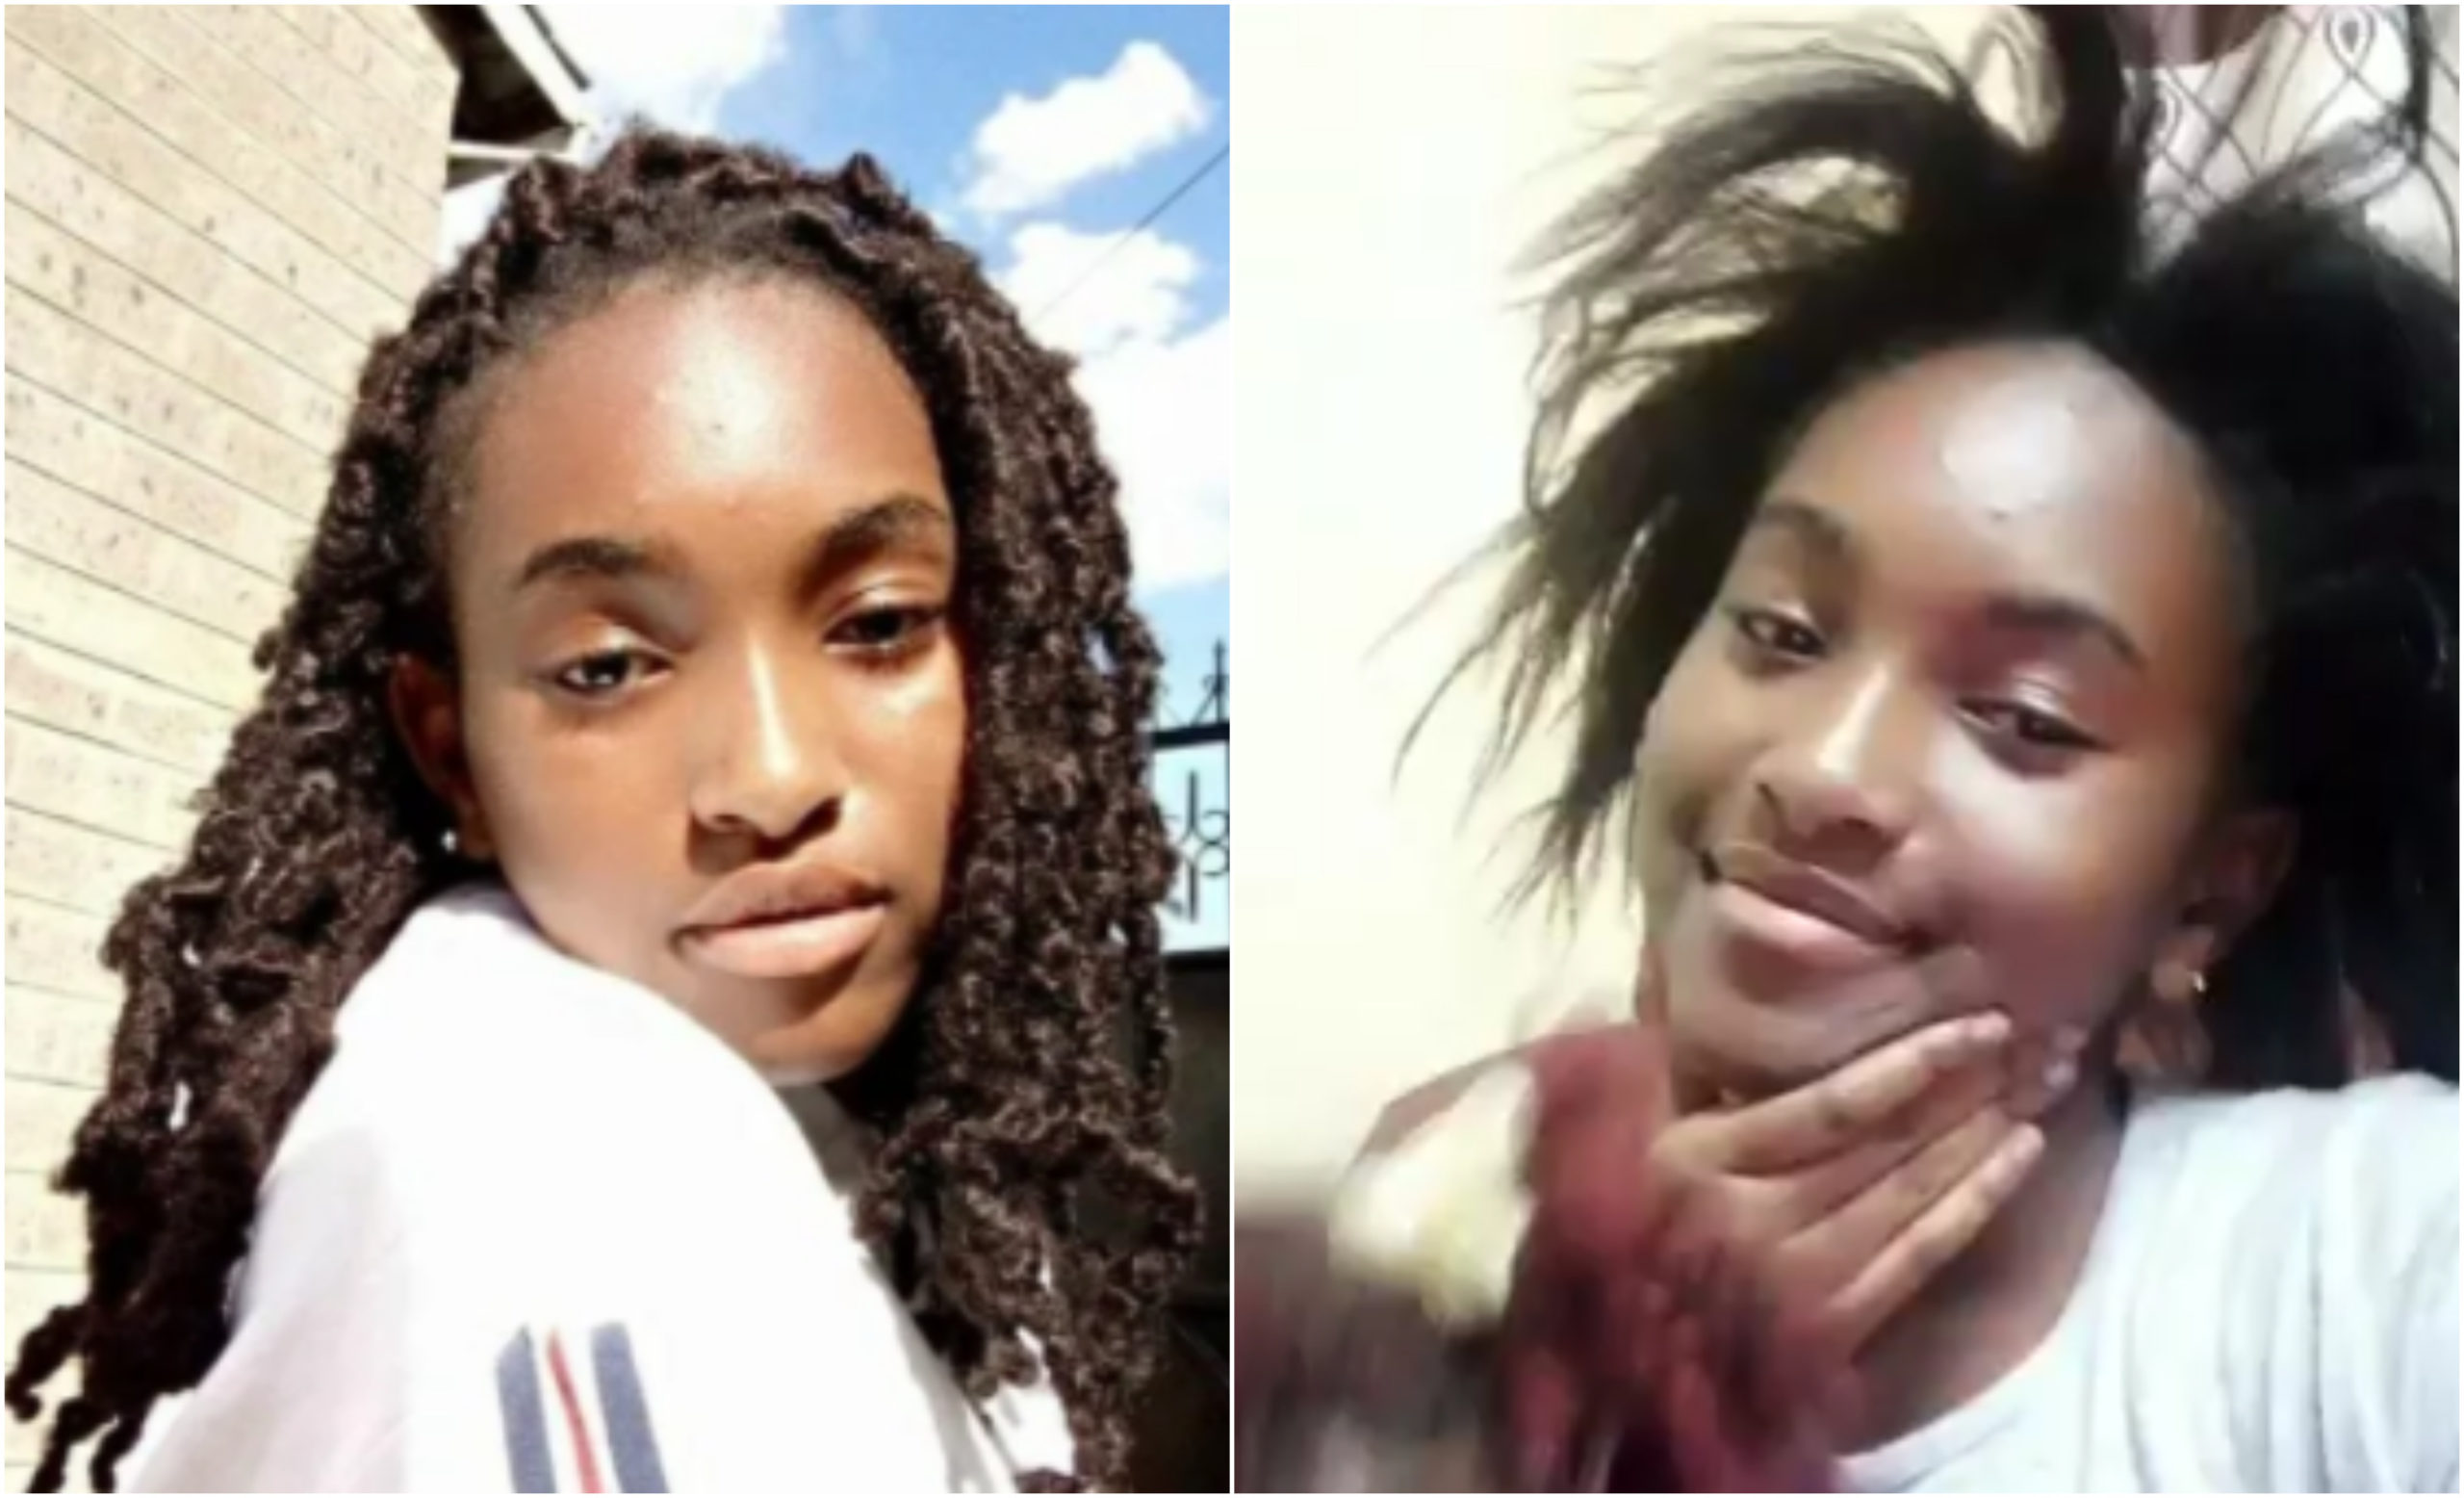 Alarm as 7 teenage girls from Nairobi go missing after getting lured into alleged side gigs (Video)